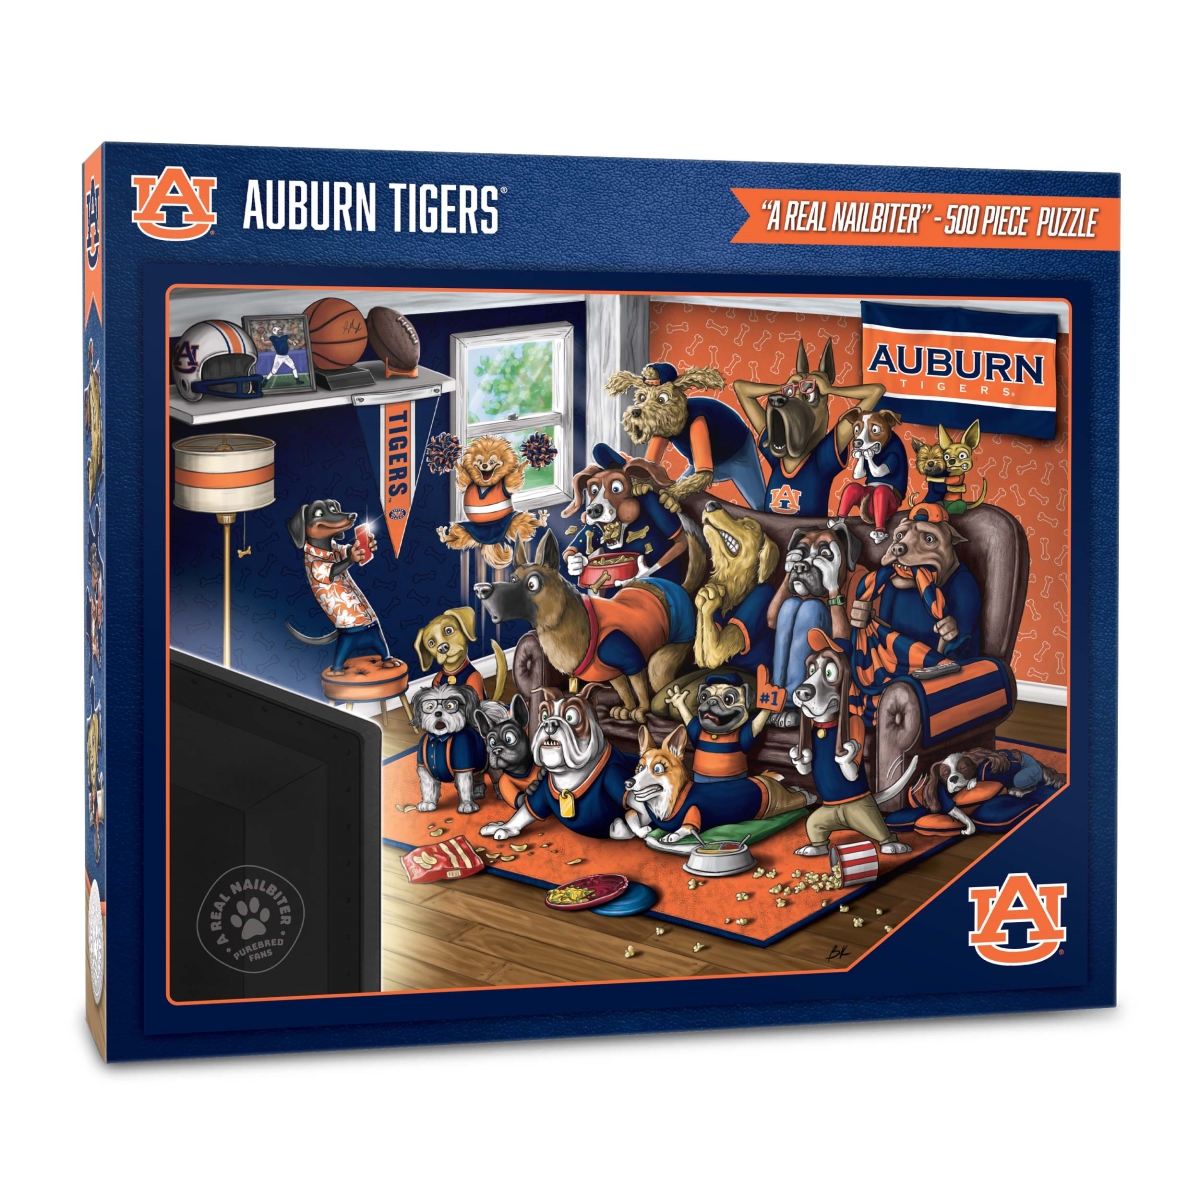 Picture of YouTheFan 2502809 18 x 24 in. NCAA Auburn Tigers Purebred Fans Puzzle&#44; Multi Color - A Real Nailbiter - 500 Piece